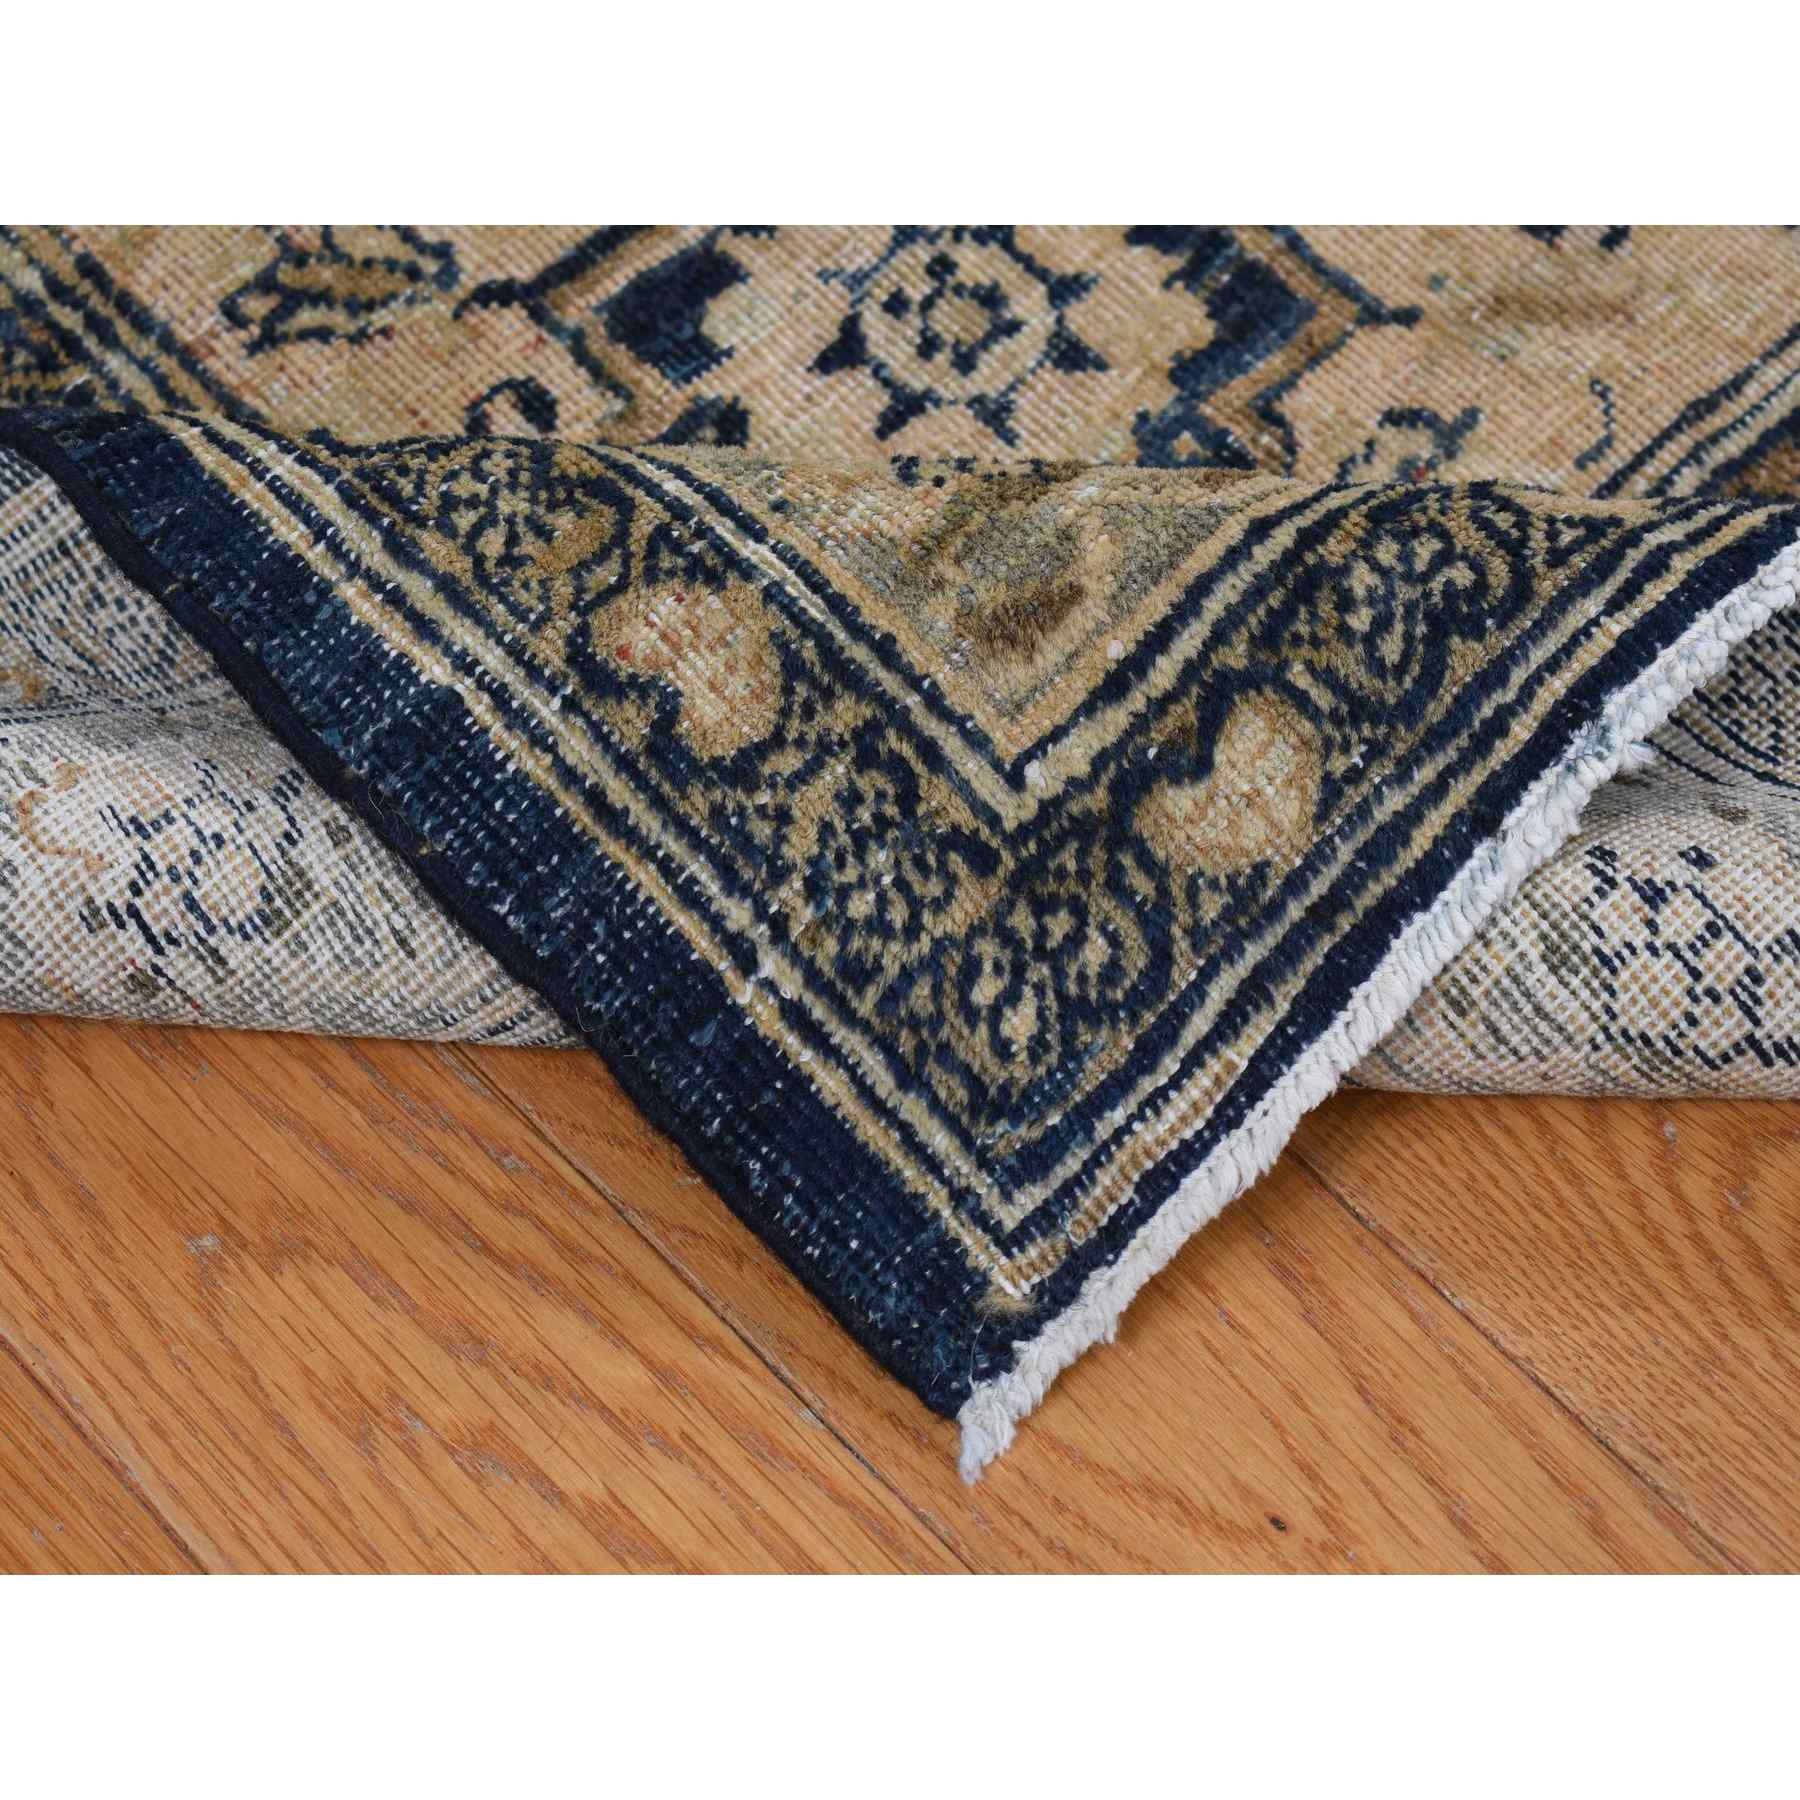 Antique-Hand-Knotted-Rug-439695